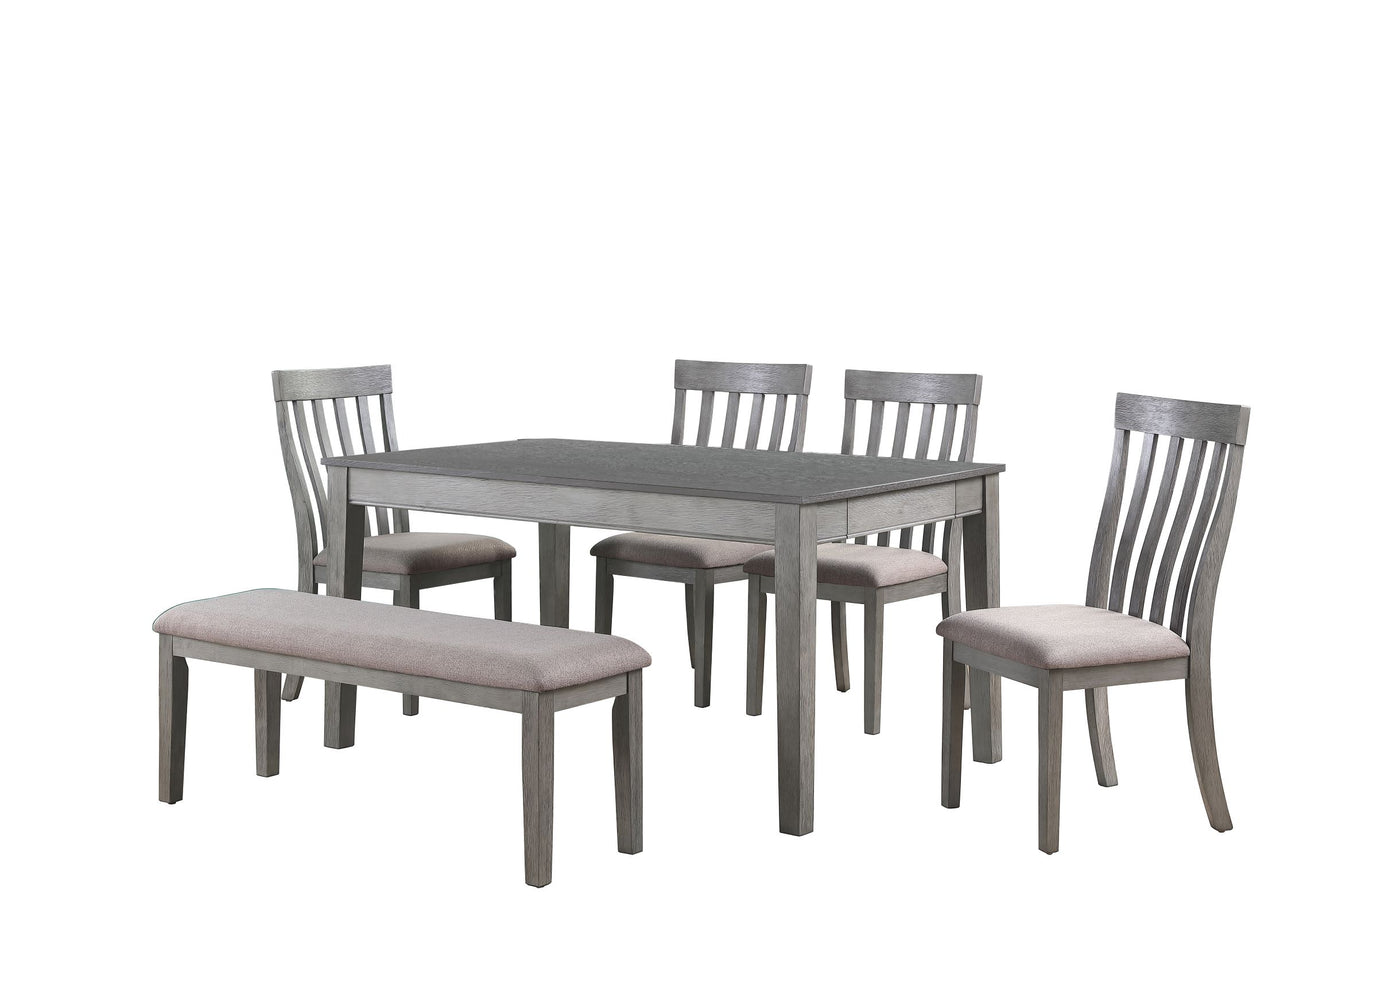 Armhurst 6-Piece Dining Set - Grey and Charcoal